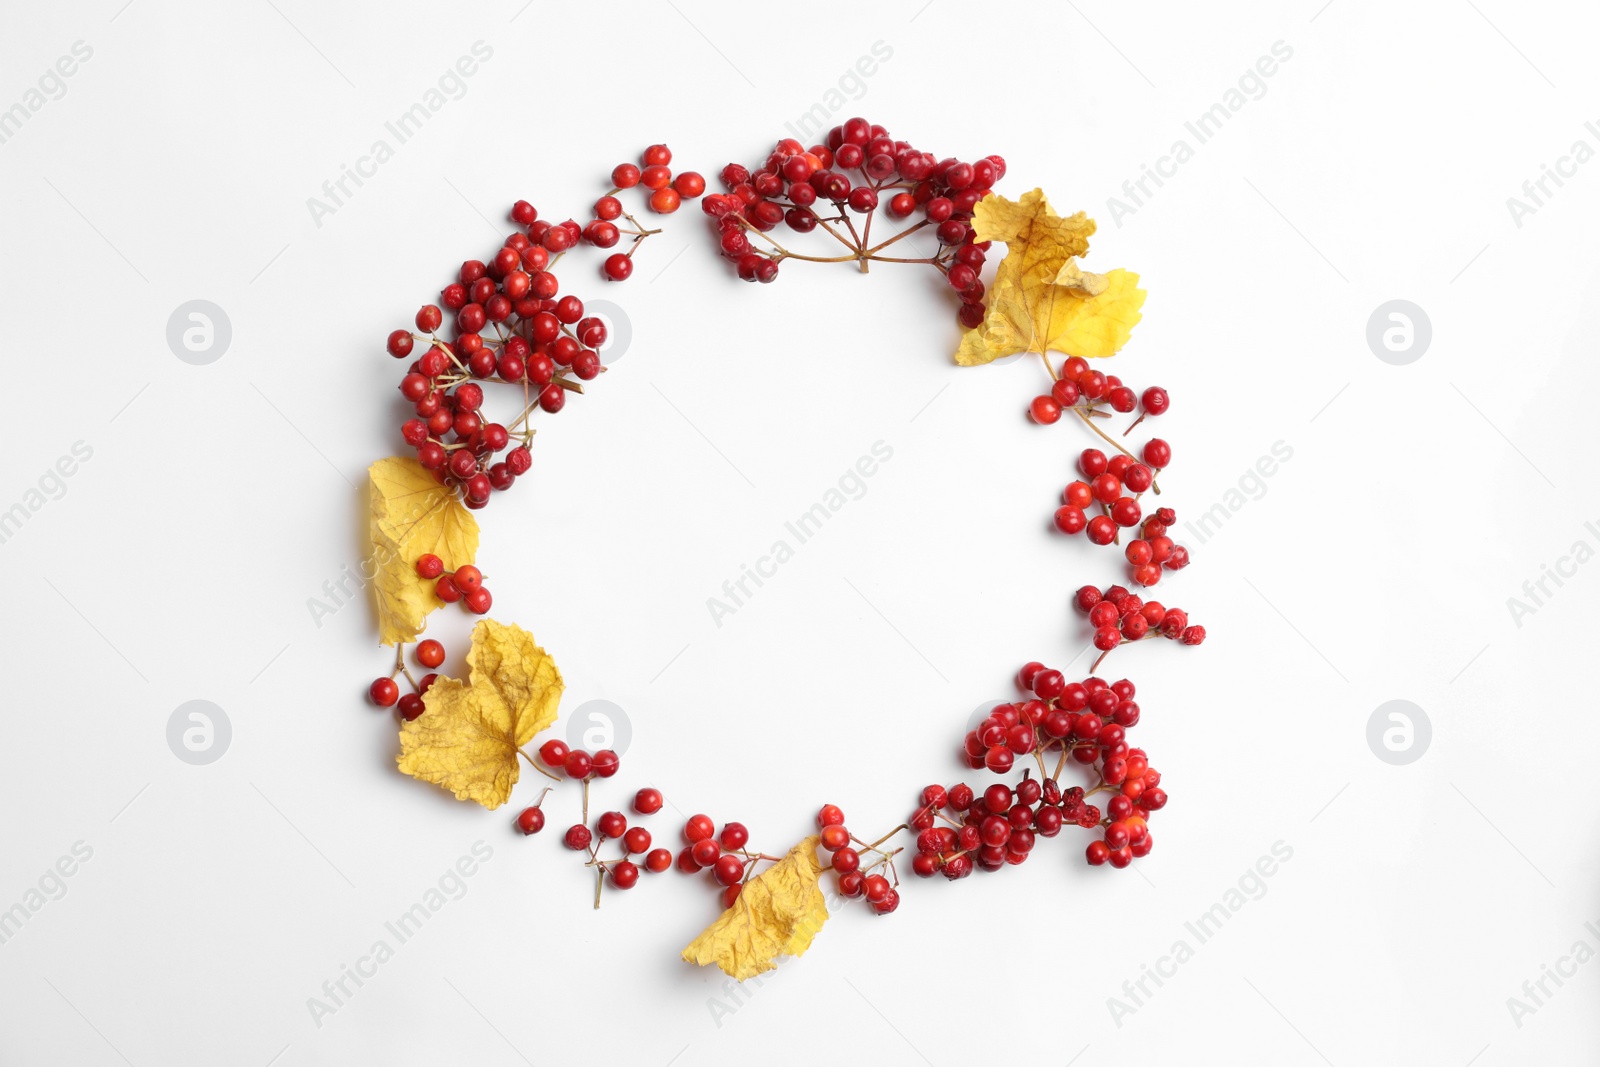 Photo of Red berries and leaves arranged in shape of wreath on white background, flat lay with space for text. Autumnal aesthetic